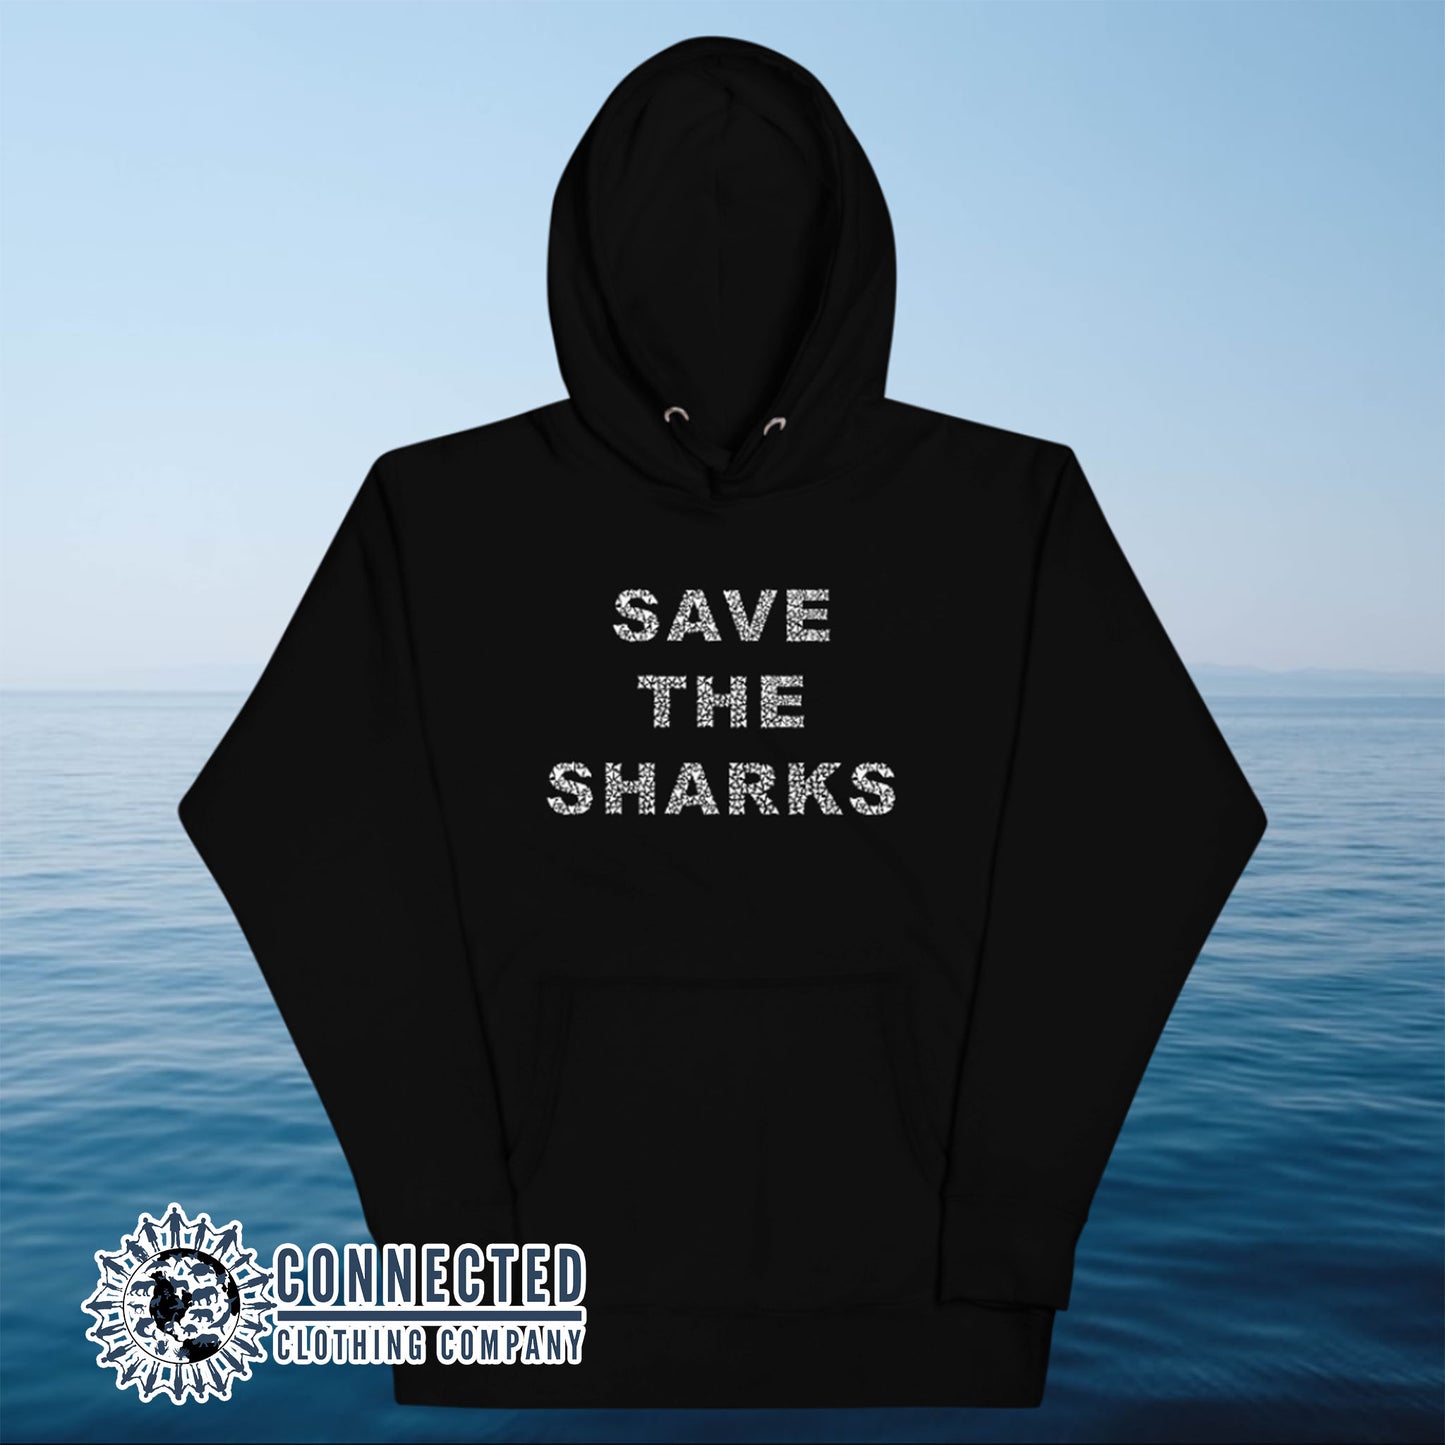 Black Save The Sharks Unisex Hoodie - Connected Clothing Company - Ethically and Sustainably Made - 10% donated to Oceana shark conservation